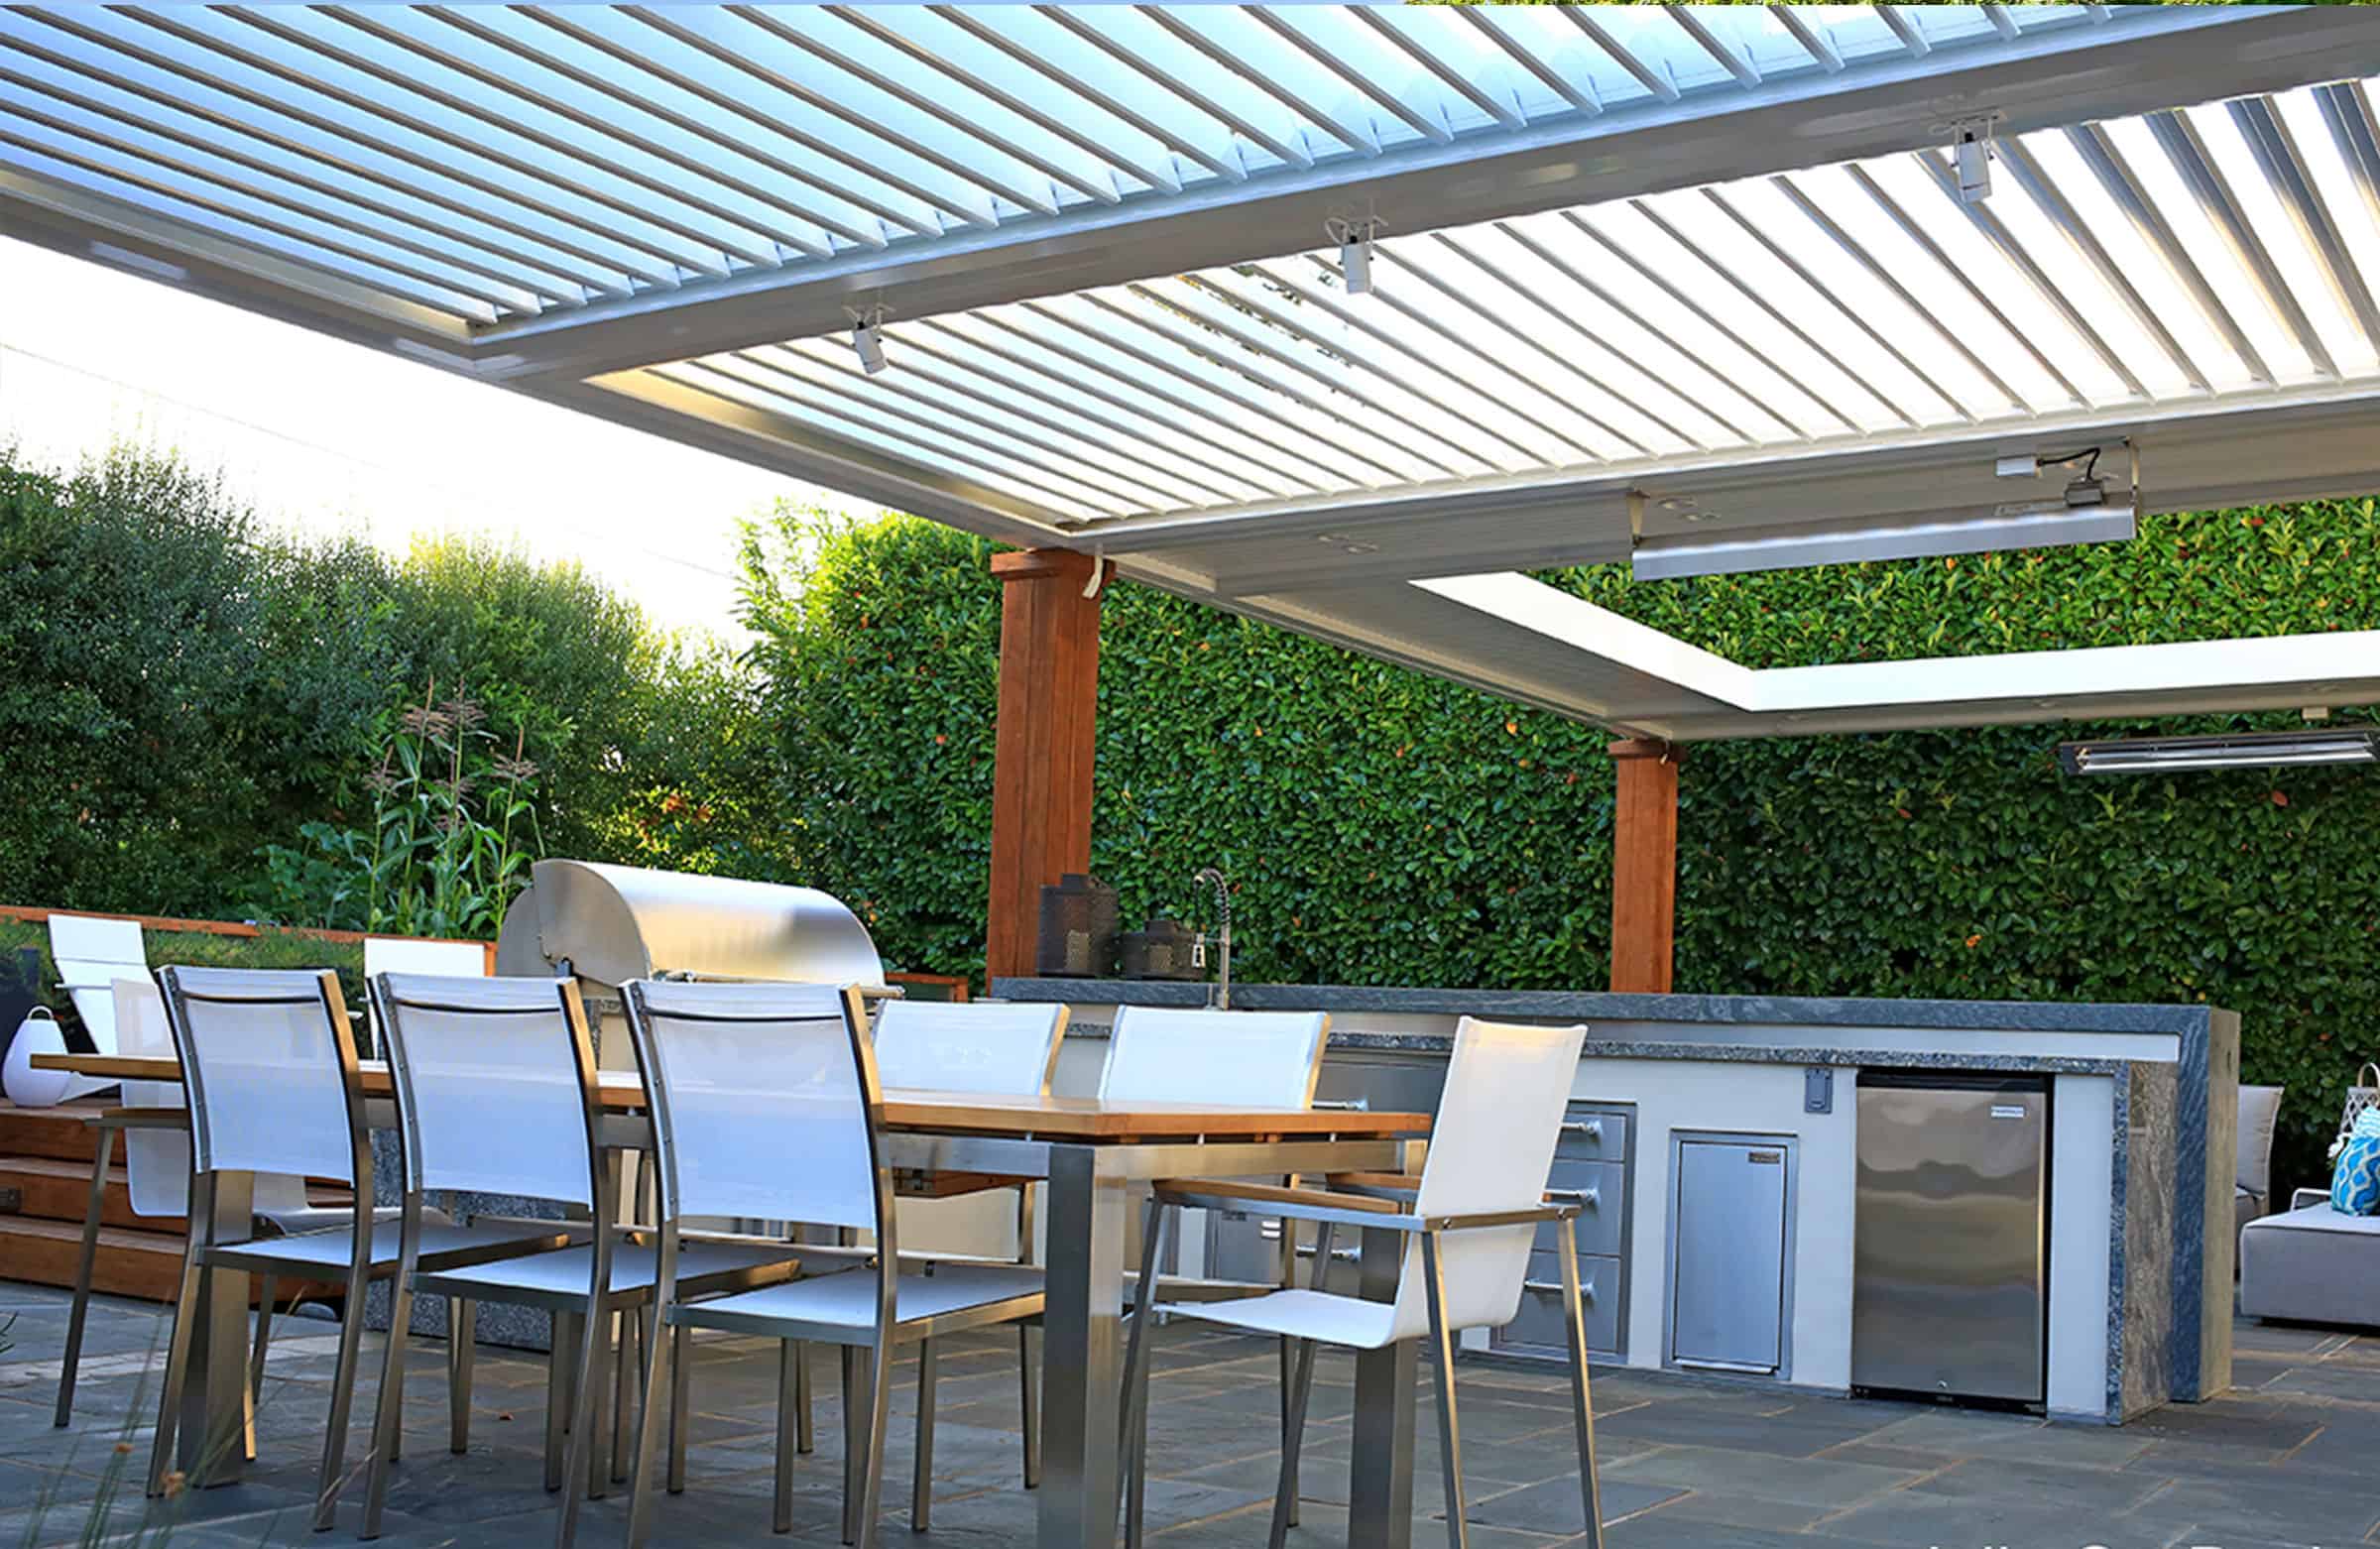 Pergolas by Julie - Louvered Pergola with Outdoor Kitchen